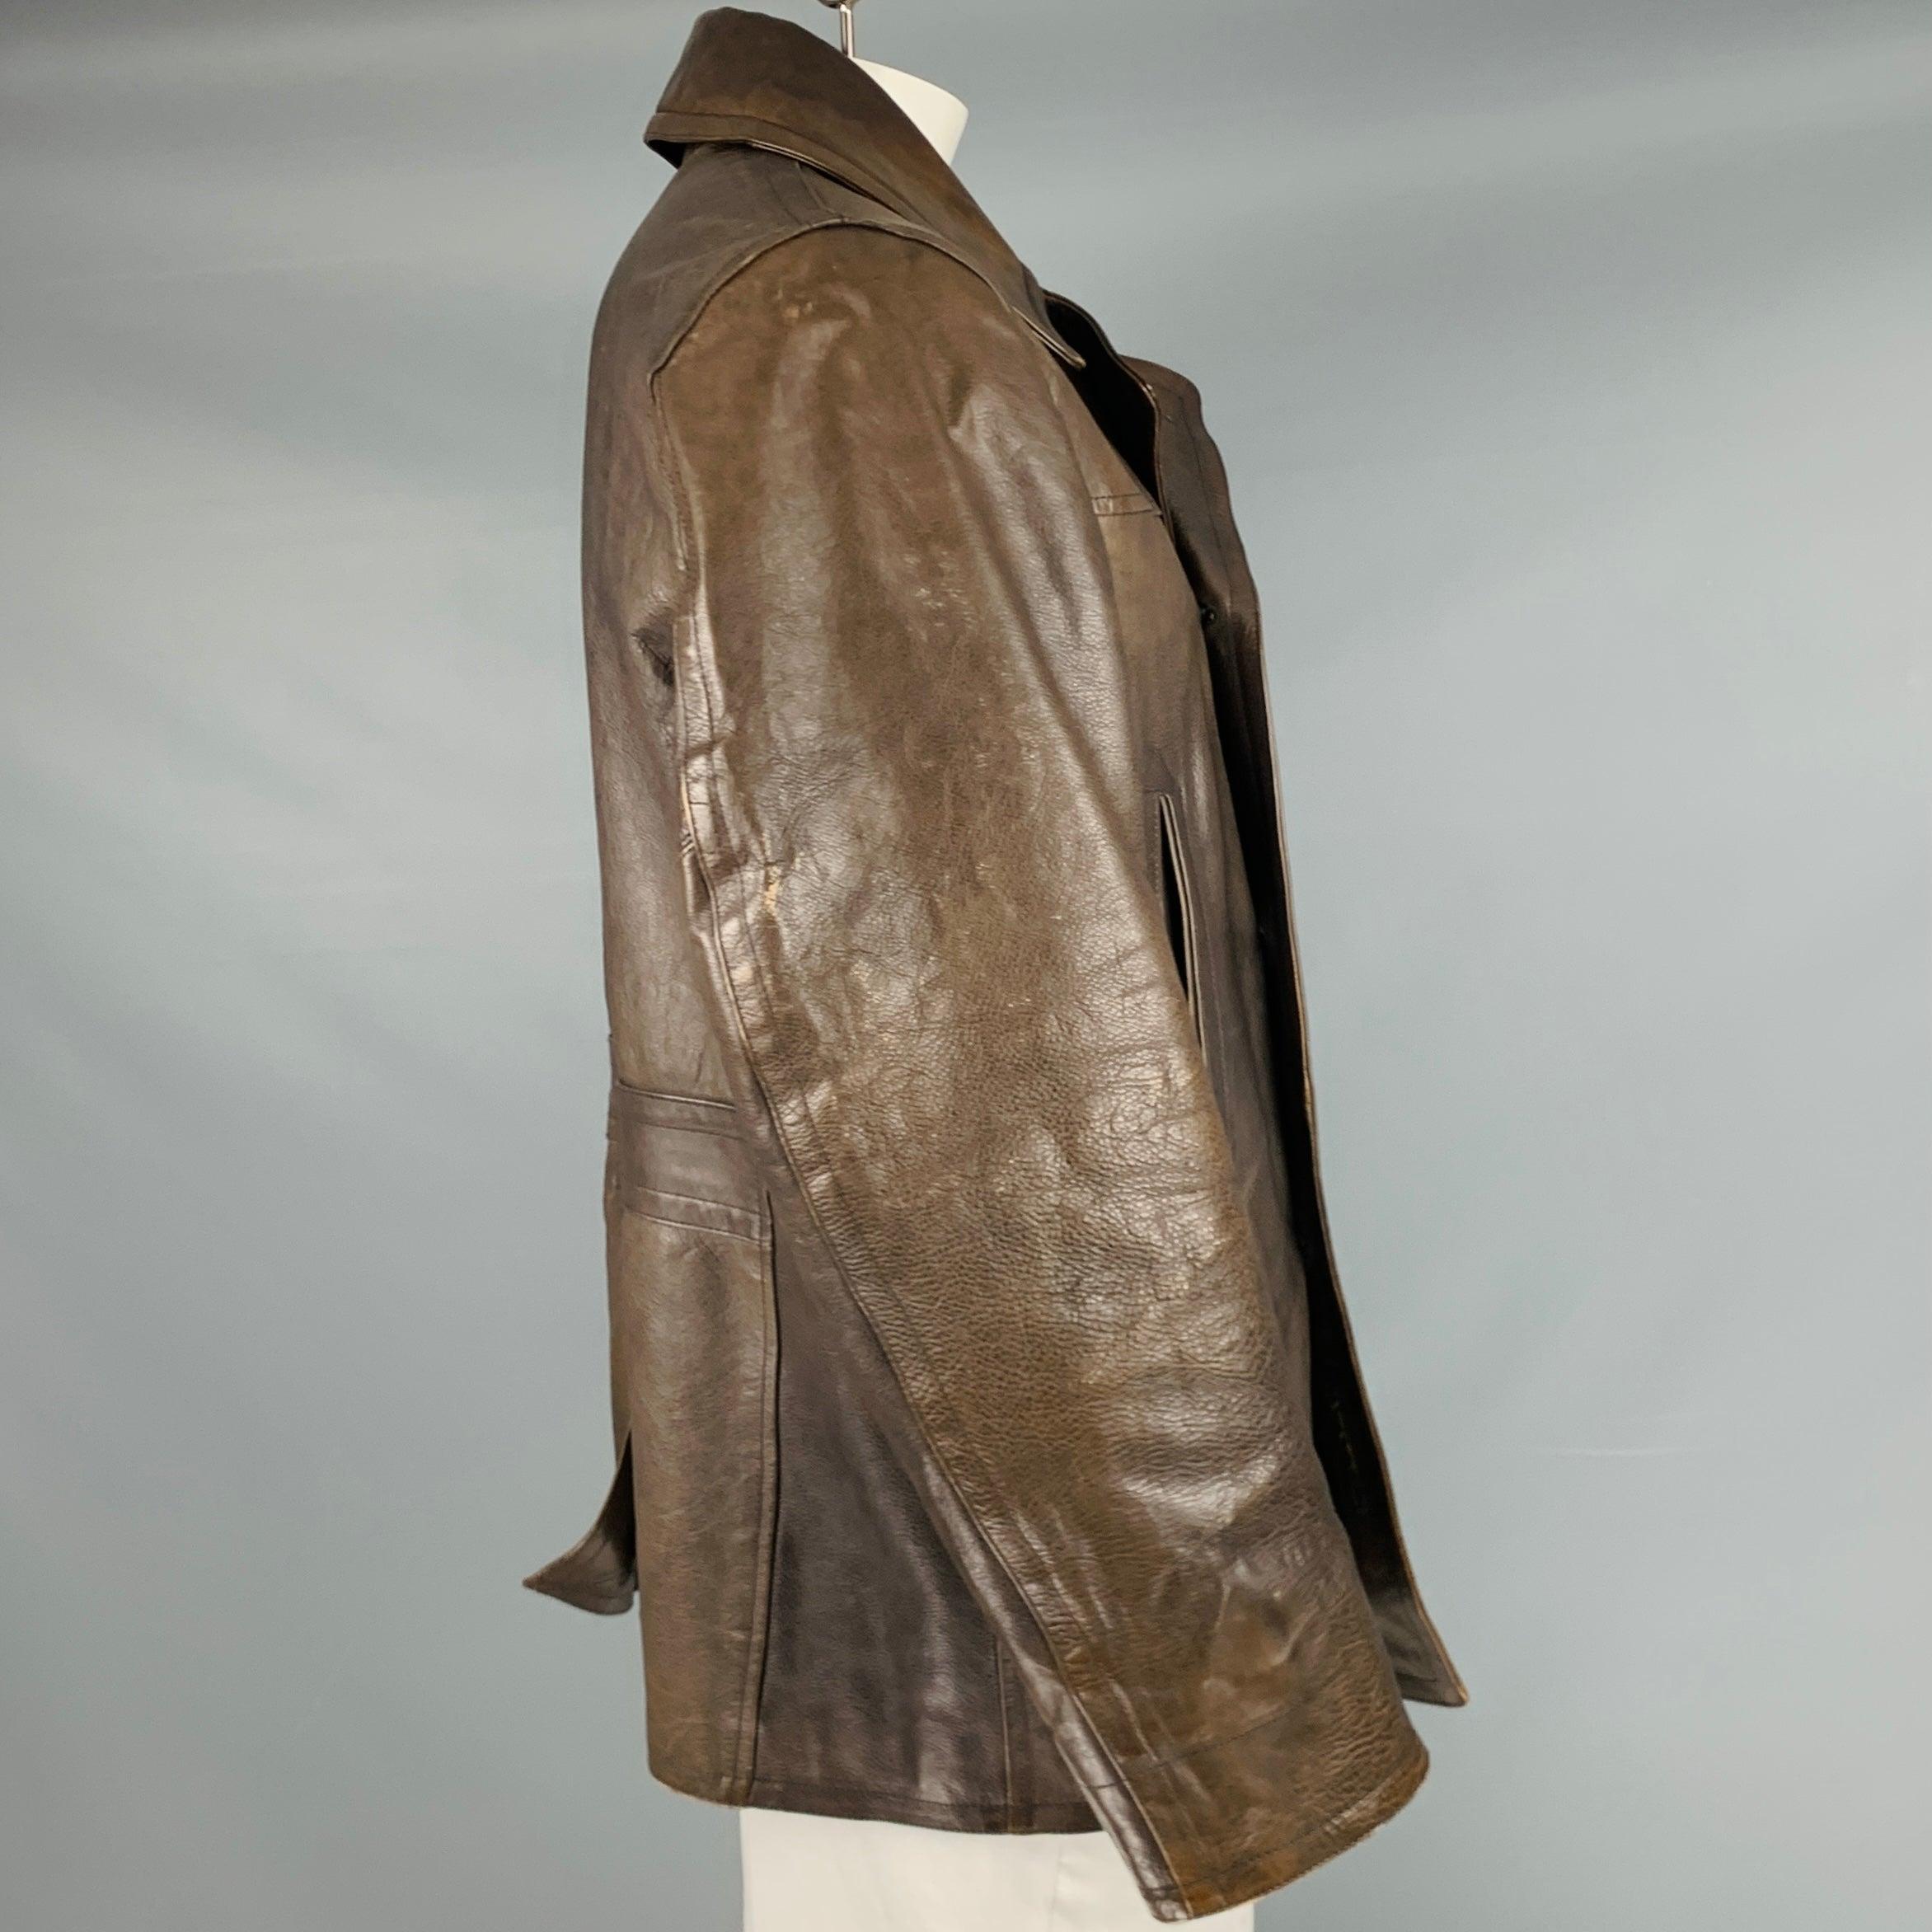 RRL by RALPH LAUREN coat
in a brown leather fabric featuring a double breasted peacoat style, two slit pockets, and button closure.Very Good Pre-Owned Condition. Moderate signs of wear. 

Marked:   XL 

Measurements: 
 
Shoulder: 19 inches Chest: 44